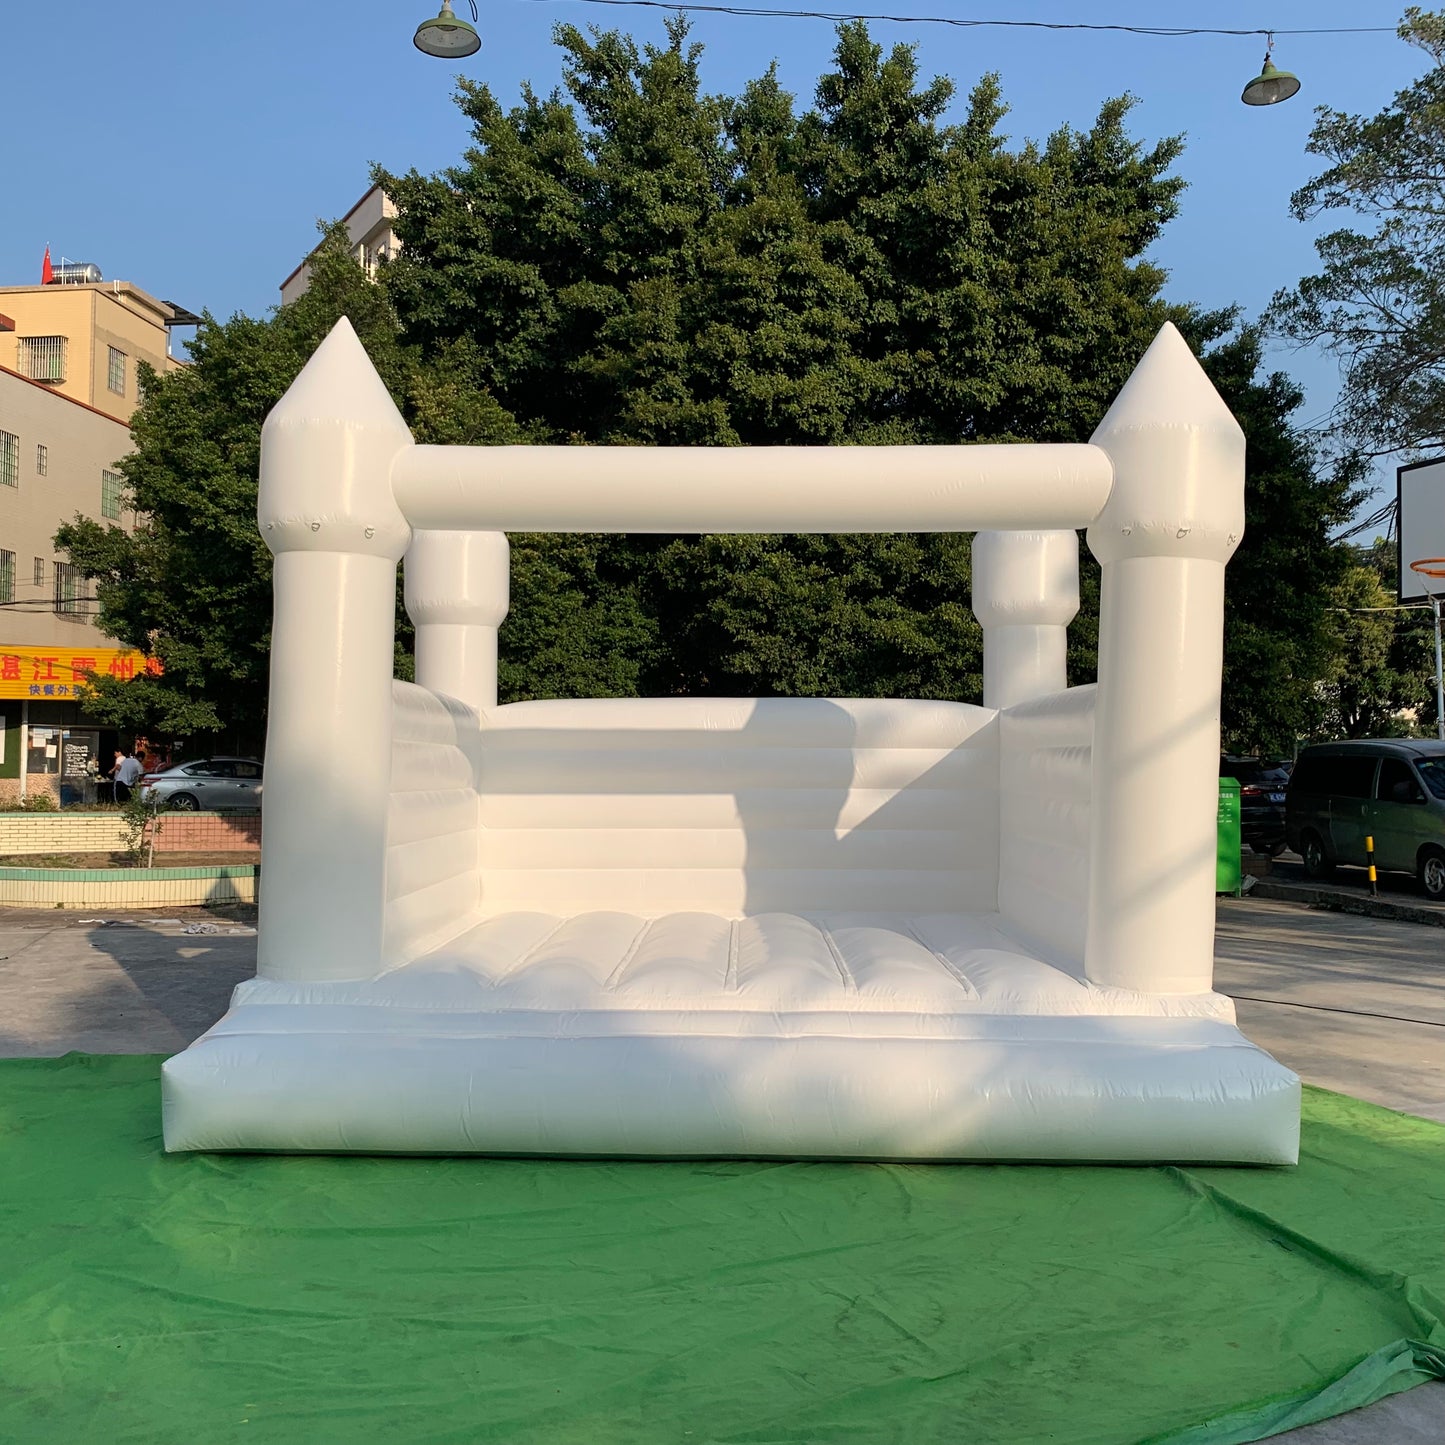 10/13/15FT White Bounce House Inflatable For Sale With Free Shipping